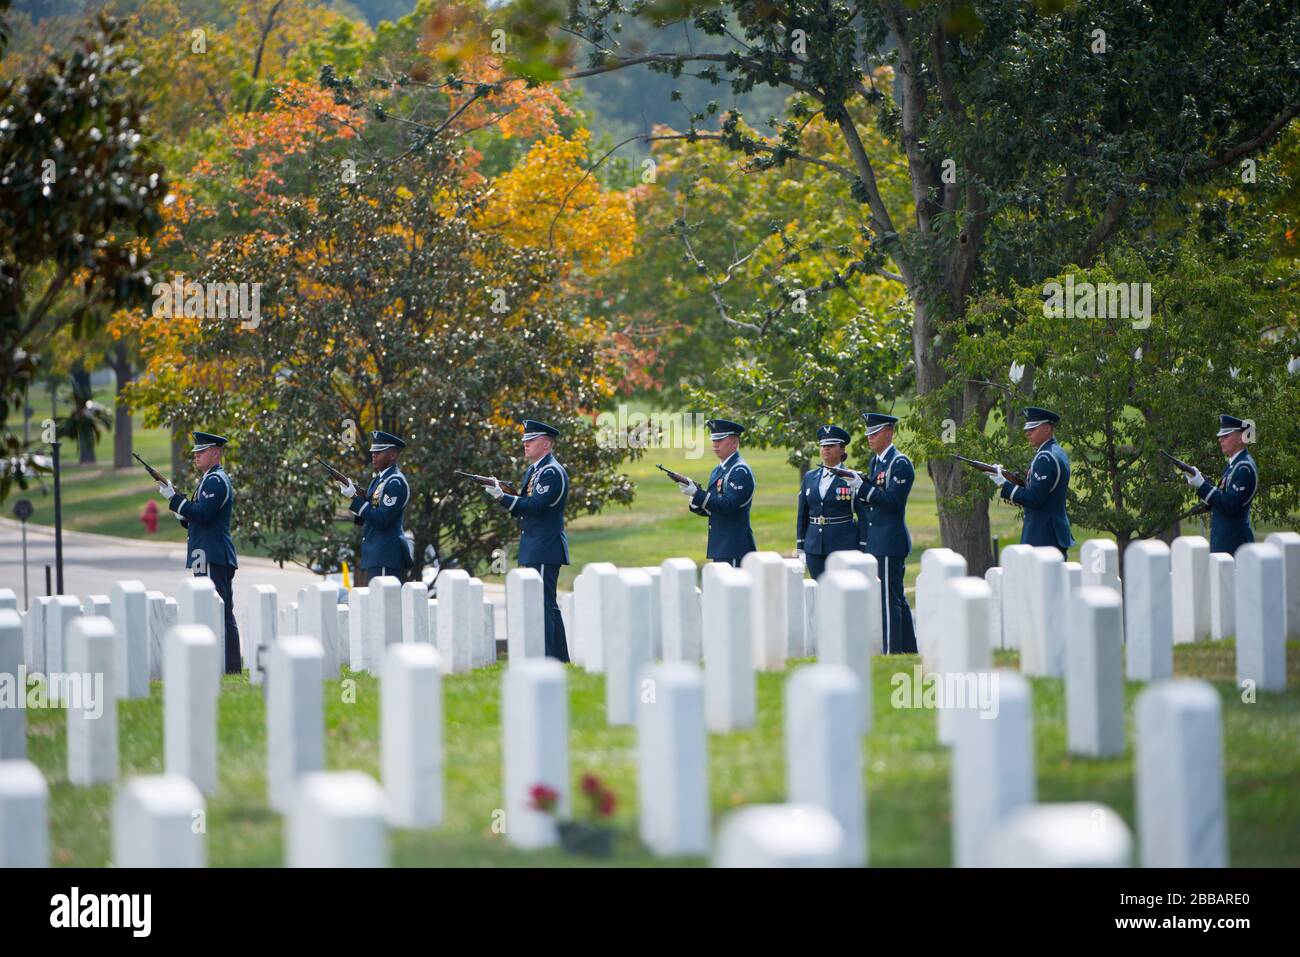 'The U.S. Air Force Honor Guard, The U.S. Air Force Band, and The 3d U.S. Infantry Regiment (The Old Guard) Caisson Platoon participated in a full honors funeral for U.S. Air Force Col. Robert Anderson in section 55 of Arlington National Cemetery, Arlington, Va., Oct. 6, 2017.  Anderson, originally from Battle Creek, Michigan, went missing on Oct. 6, 1972 when his F-40 crashed in North Vietnam.  His remains were identified on Oct. 22, 1998.  (U.S. Army photo by Elizabeth Fraser / Arlington National Cemetery / released); 6 October 2017, 14:13; Full Honors Funeral for U.S. Air Force Col. Robert Stock Photo